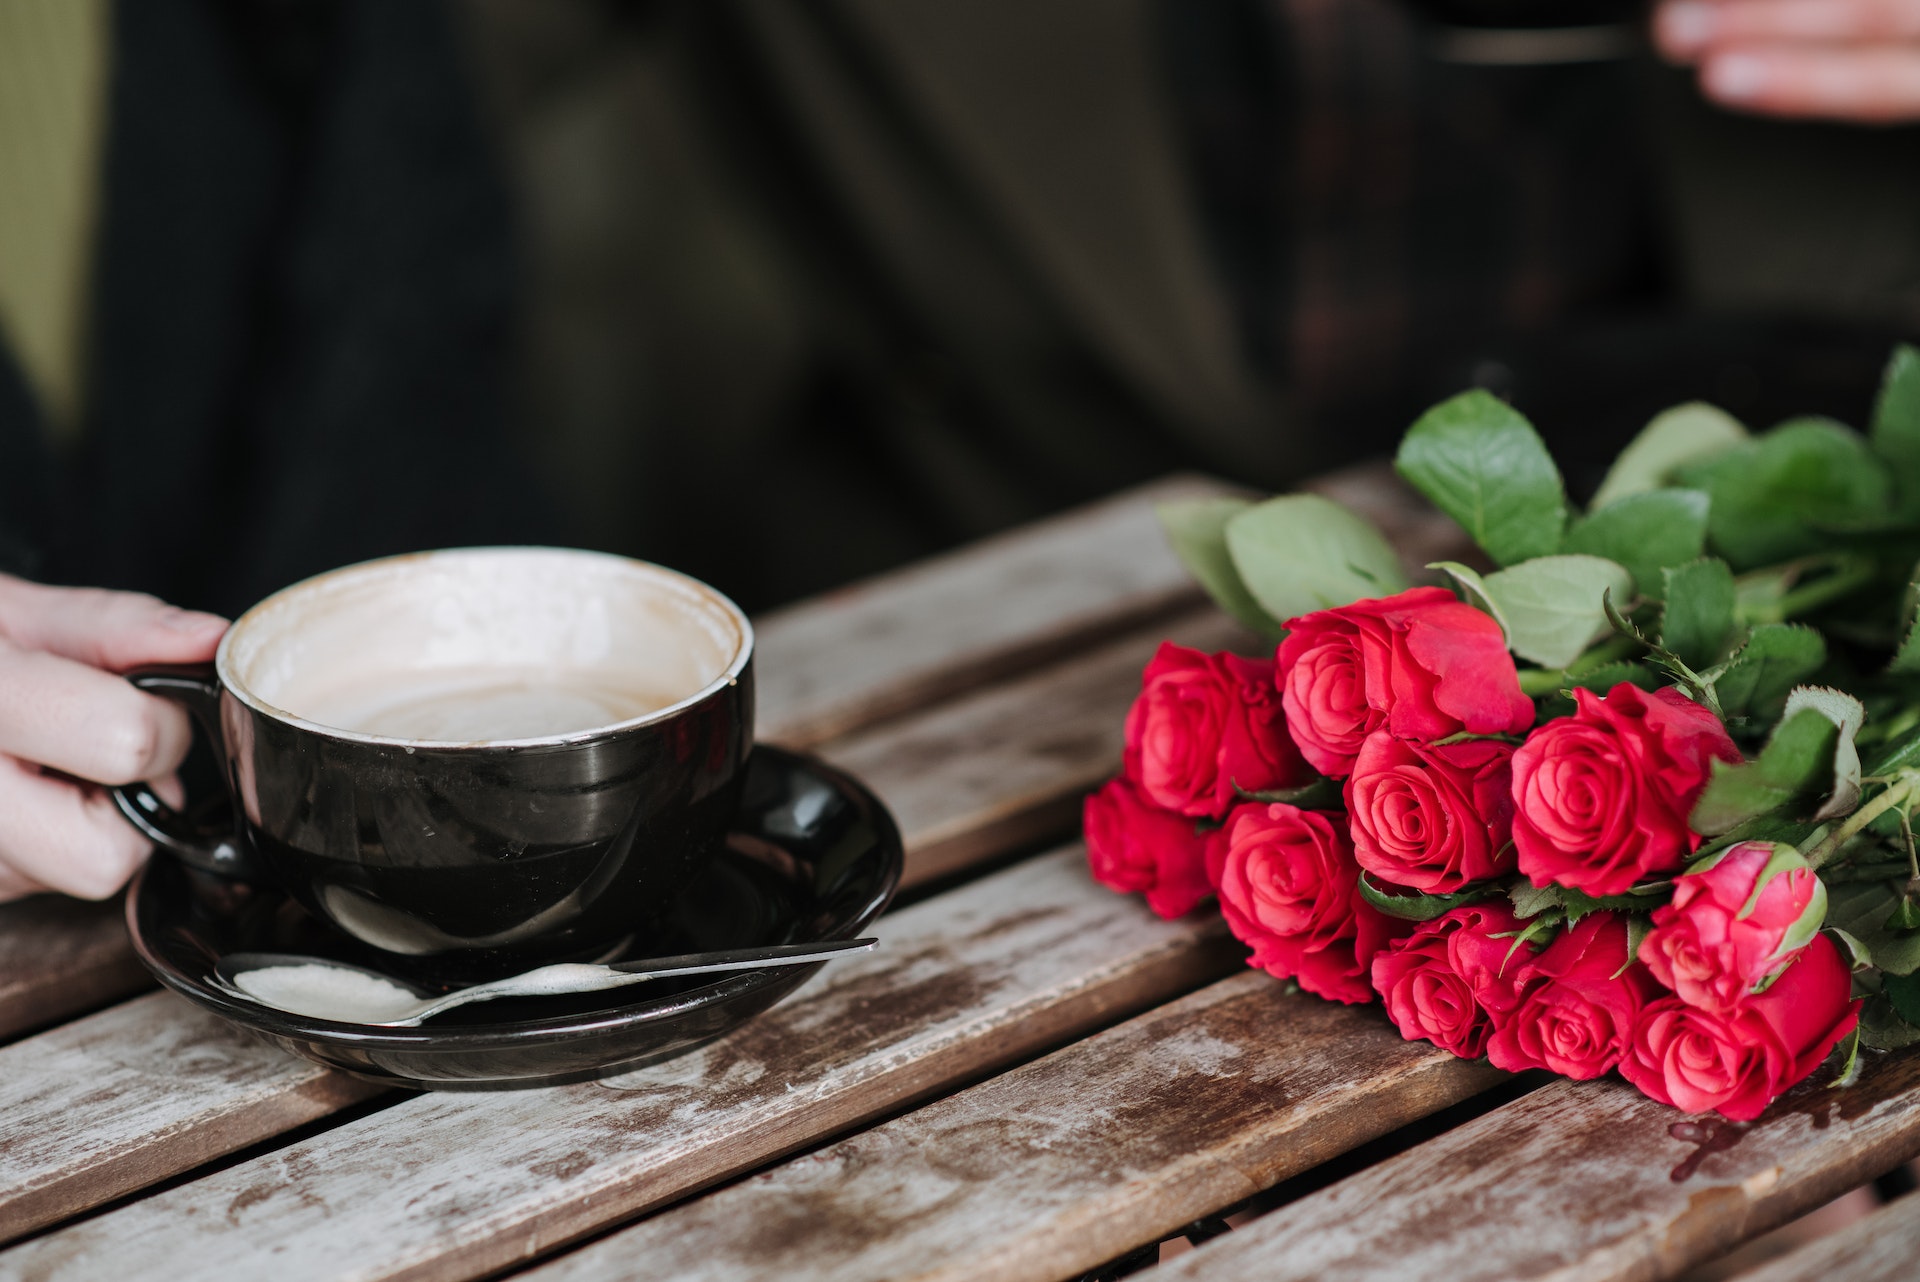 Coffee and flowers are a great way to flirt in Italian.